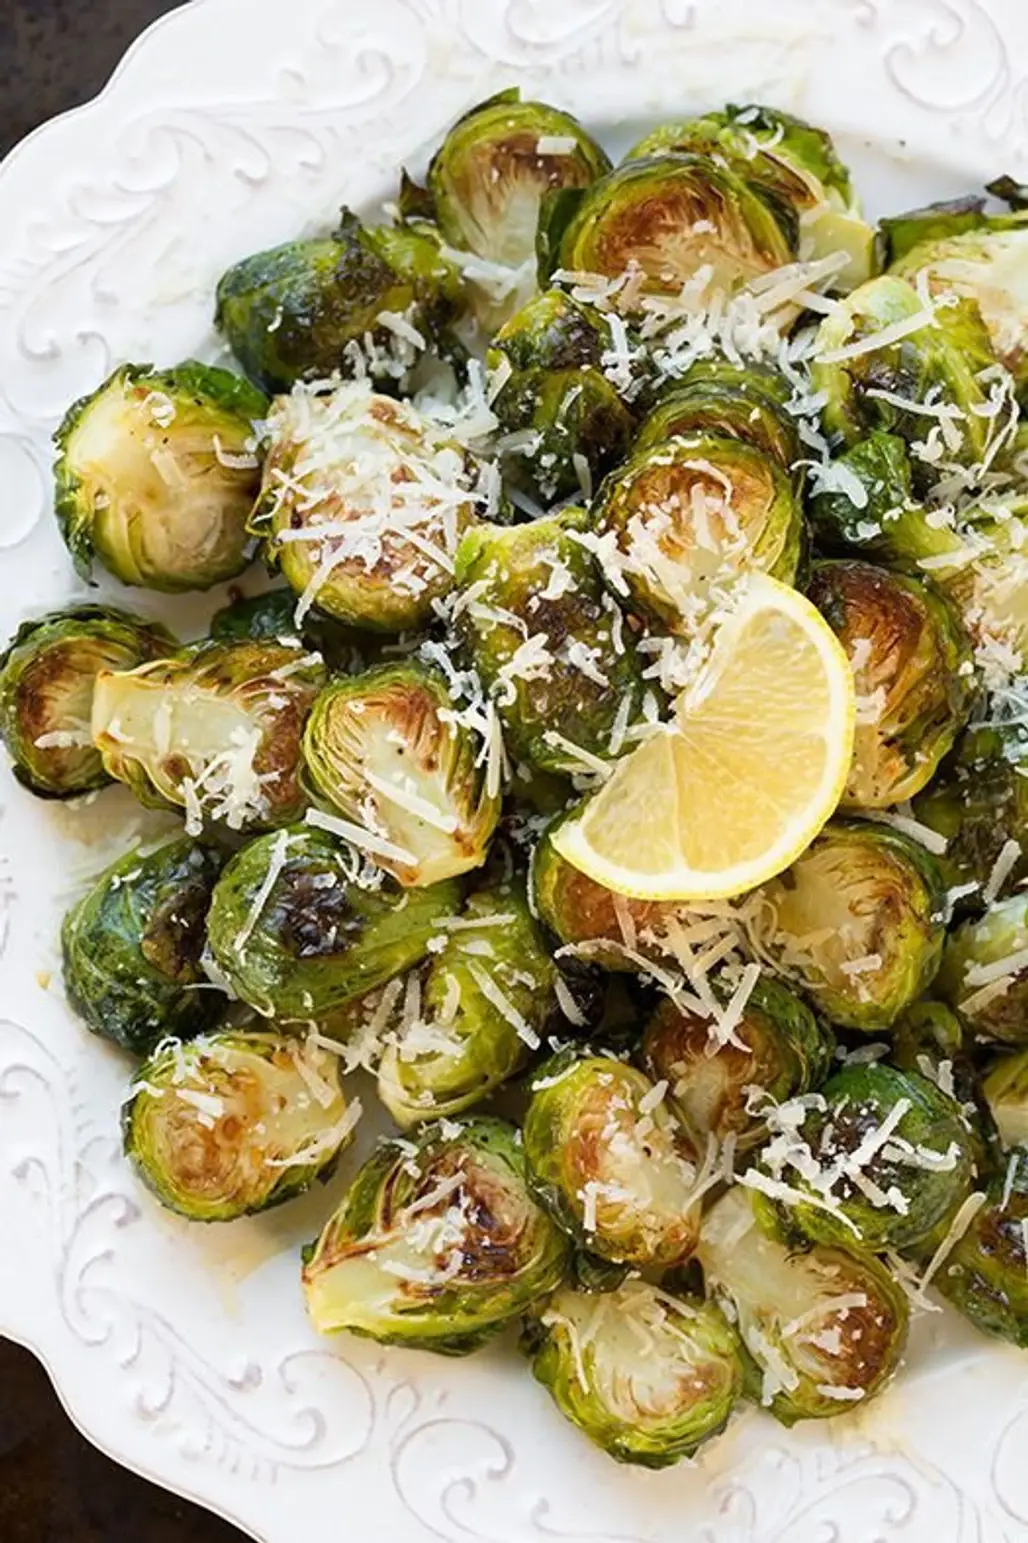 Garlic Lemon and Parmesan Roasted Brussels Sprouts